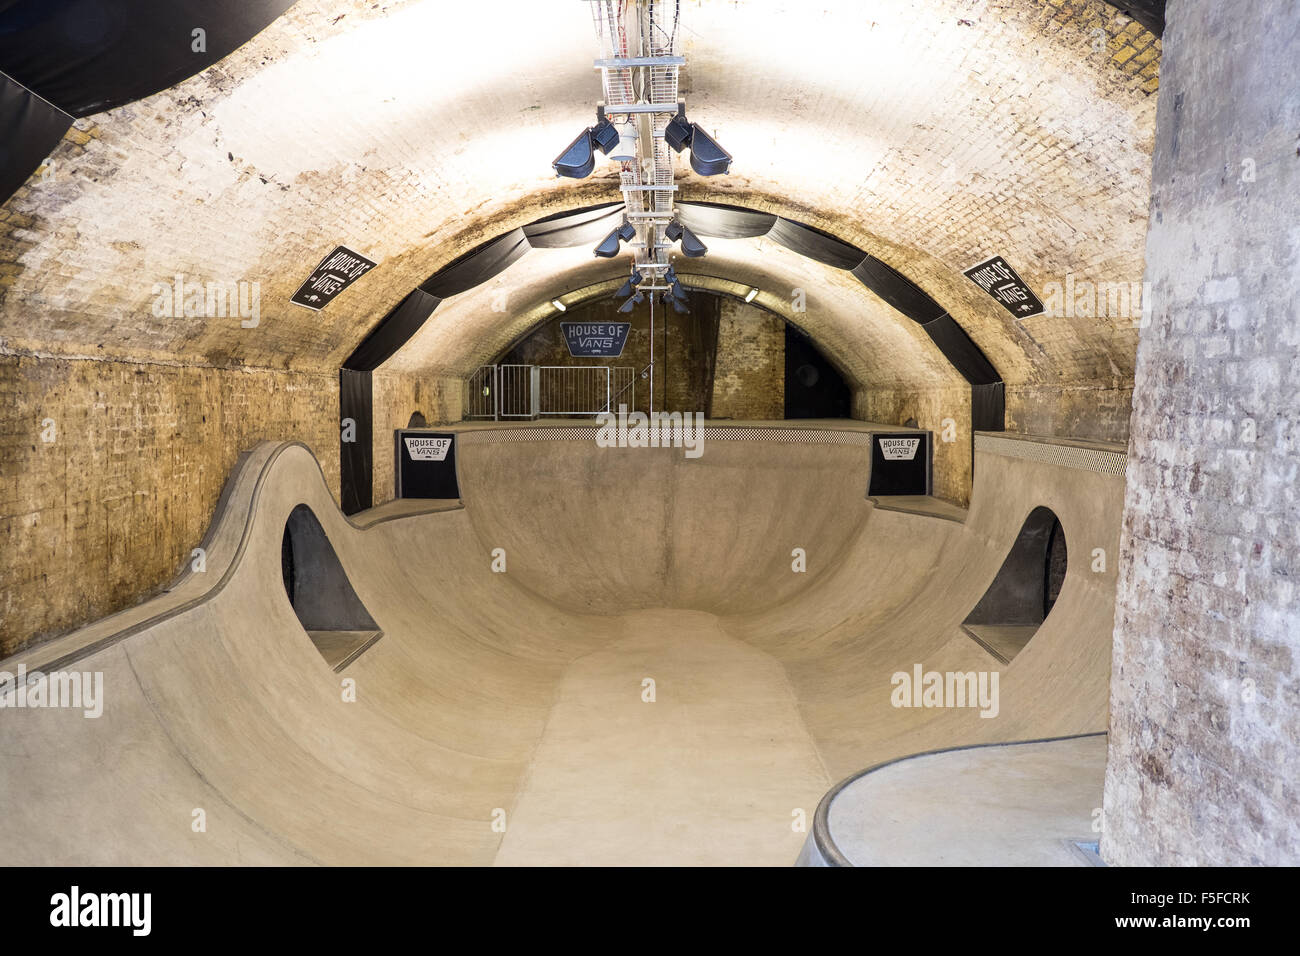 Skateboard rink at the house of vans in London Stock Photo